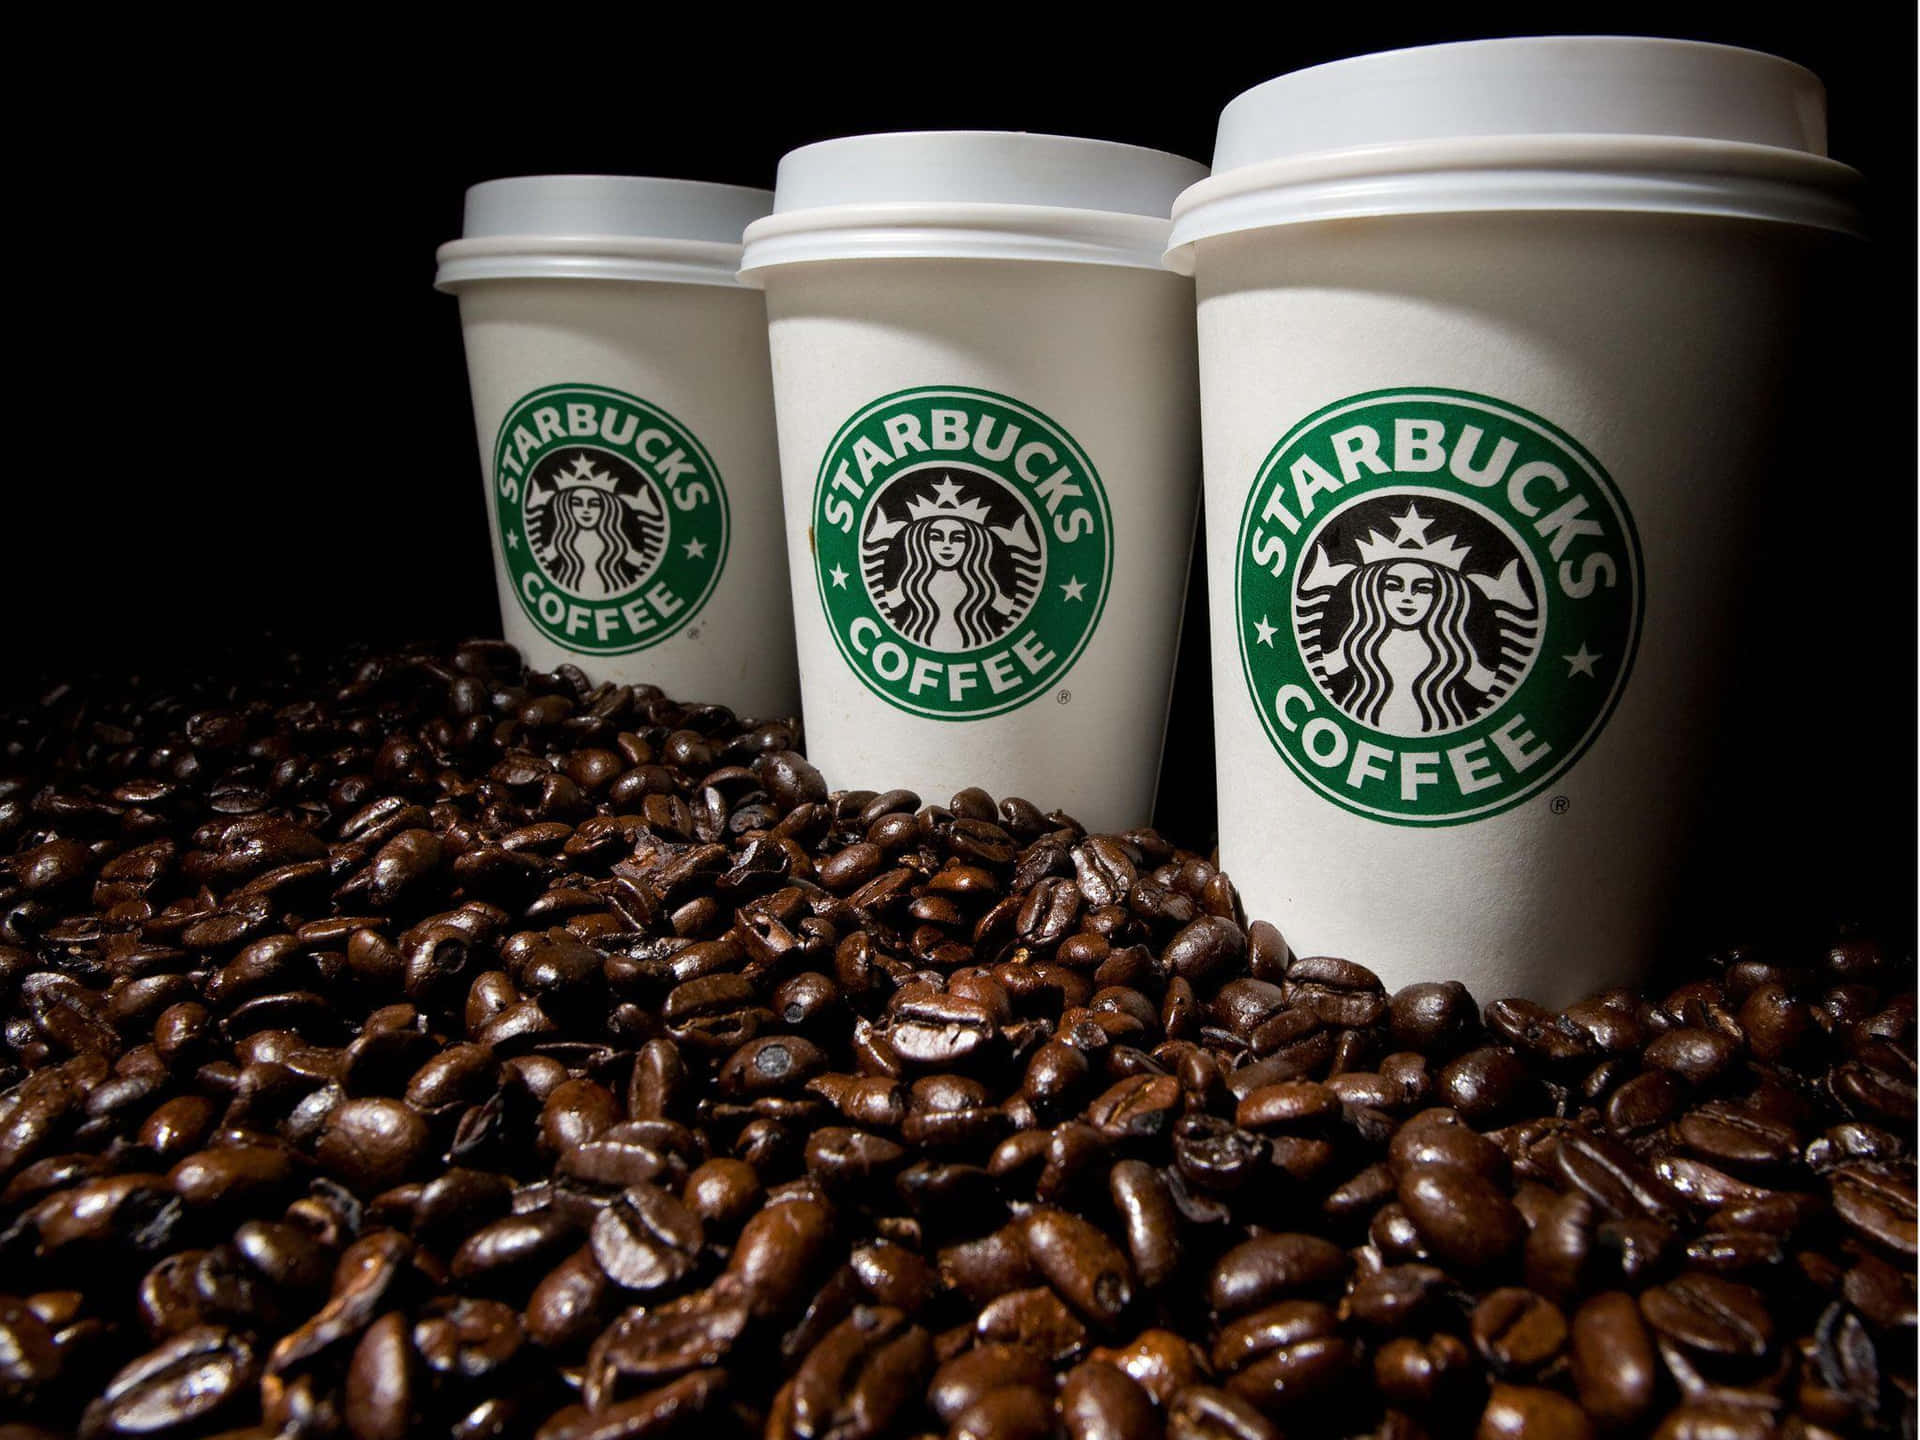 Enjoy your day with a warm cup of coffee from Starbucks